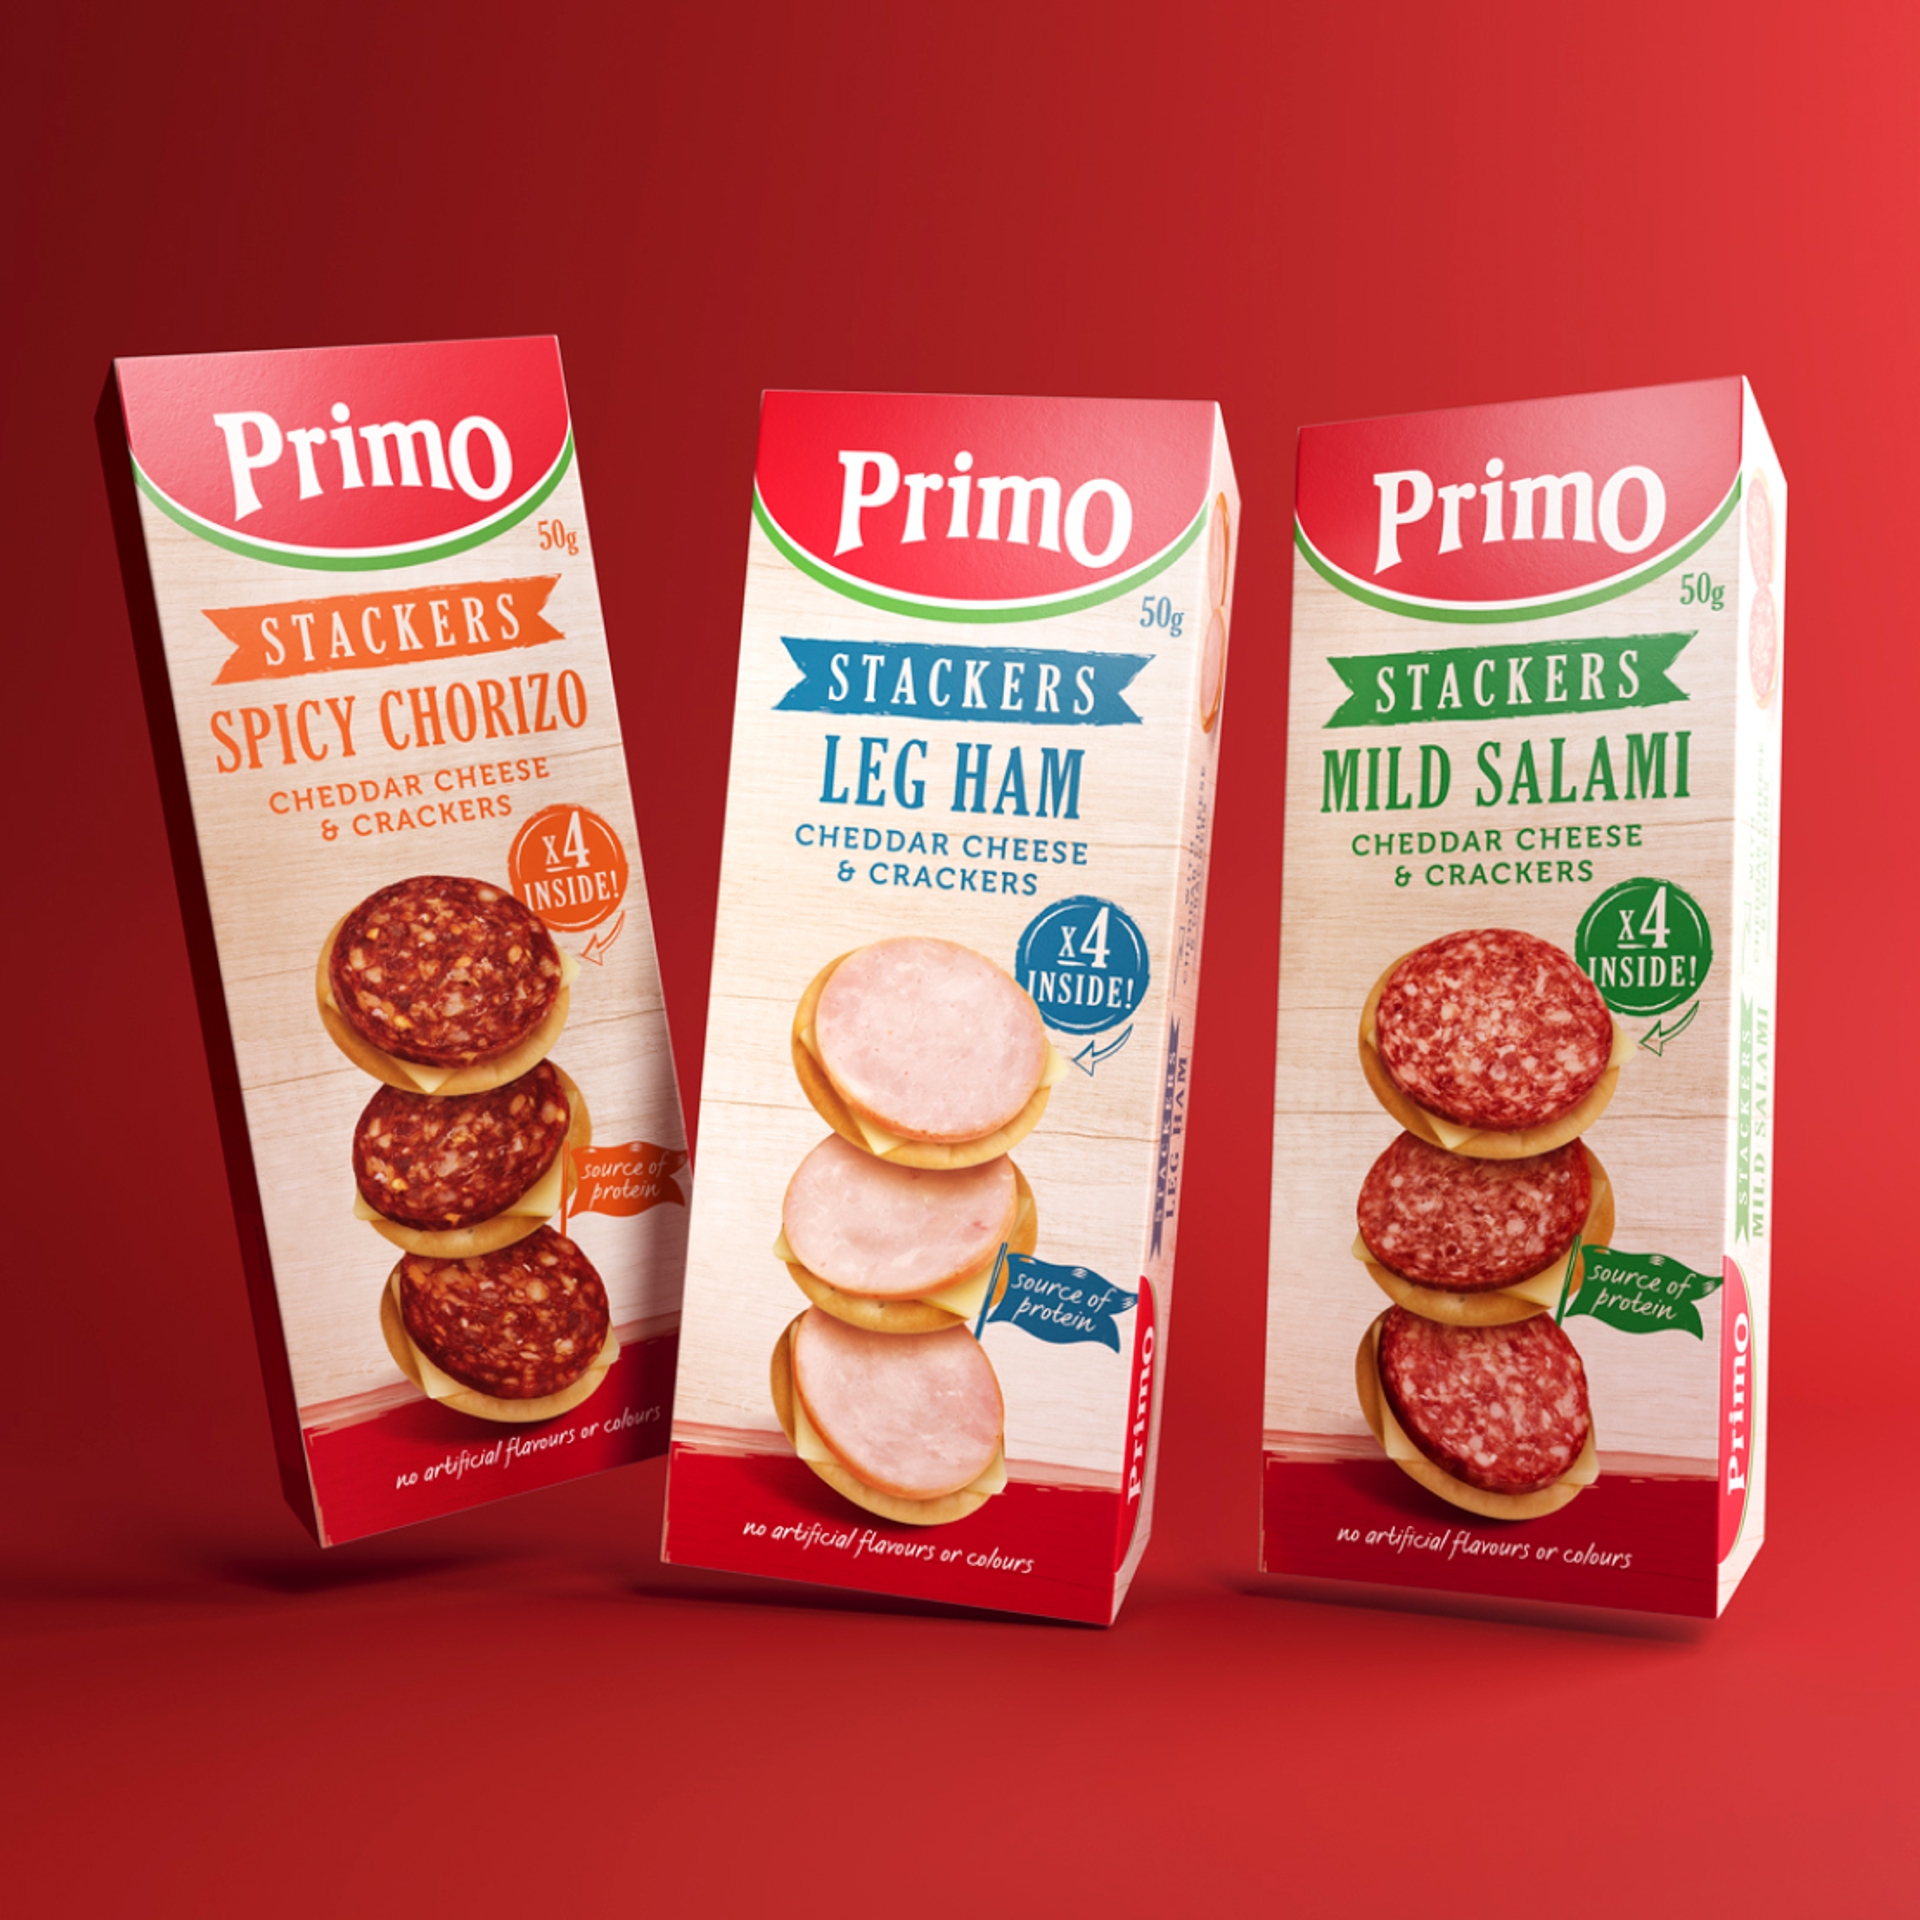 Primo Packaging design by brand design agency Our Revolution for Stackers snack range Spicy Chorizo, Leg Ham, and Mild Salami